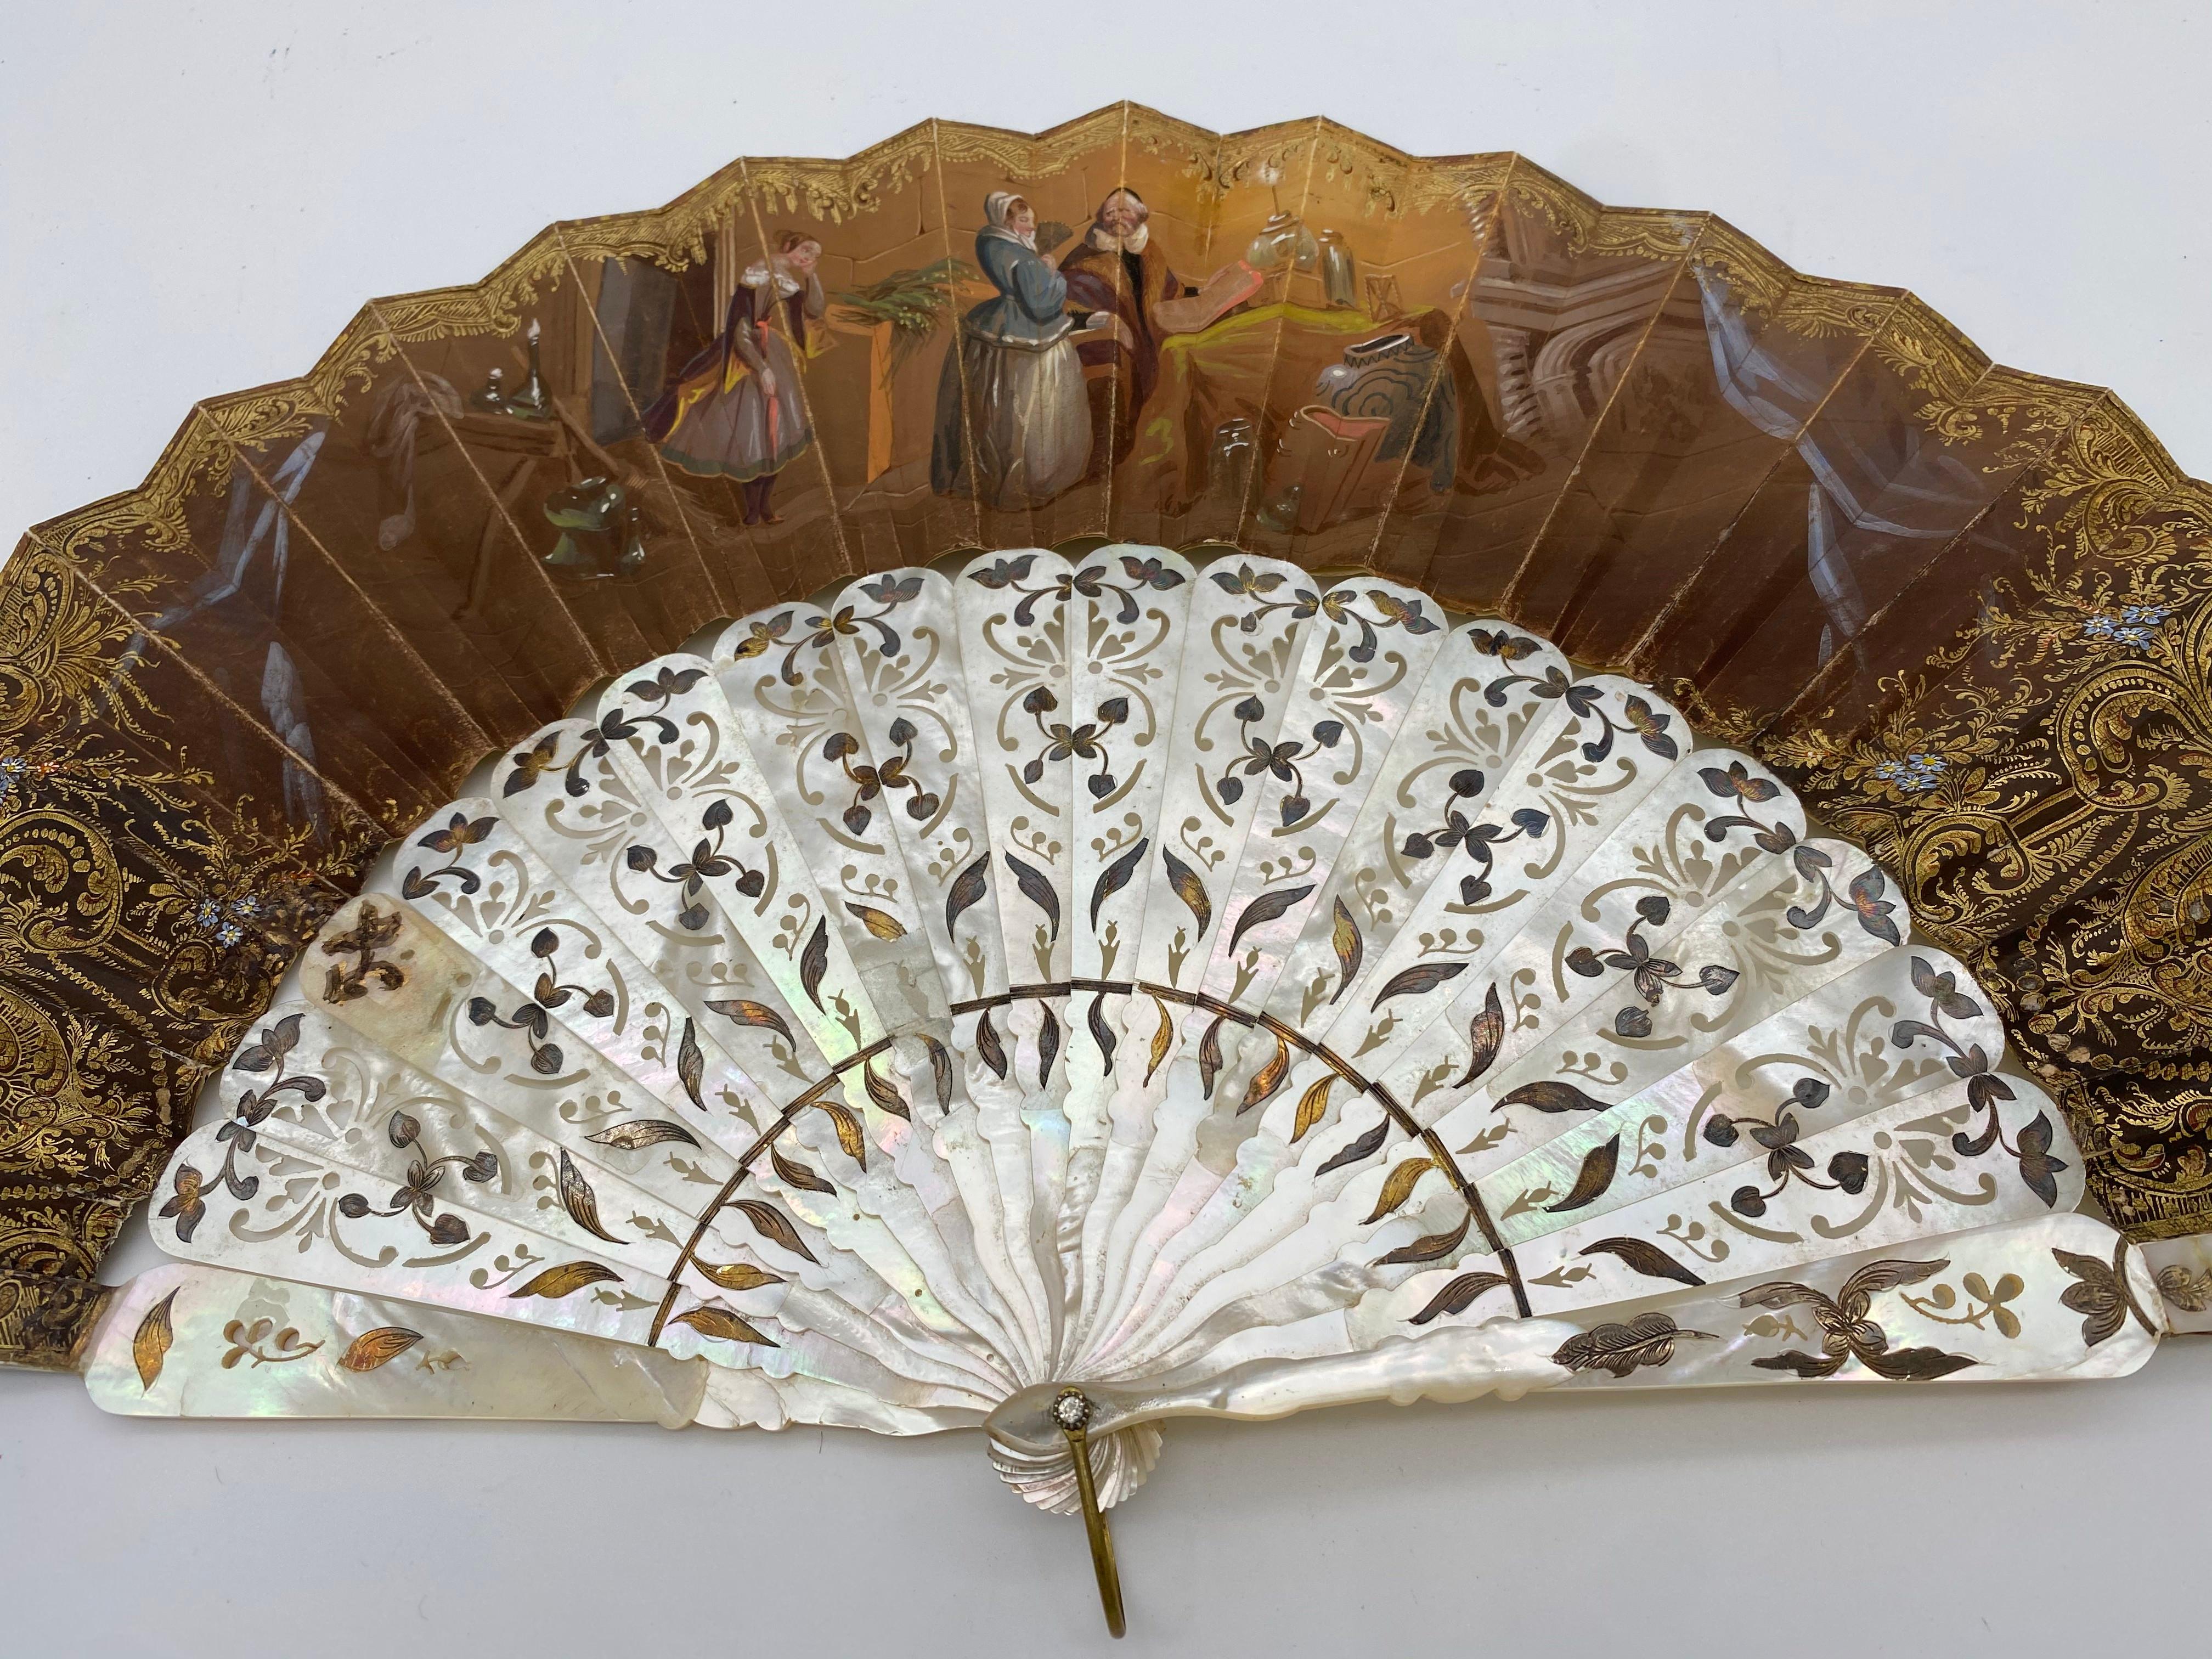 This ornate, antique paper and mother of pearl hand fan was crafted in France, circa 1850. the one side showing a candlelit interior where a young woman addresses a mage. Gallant scene on the reverse.